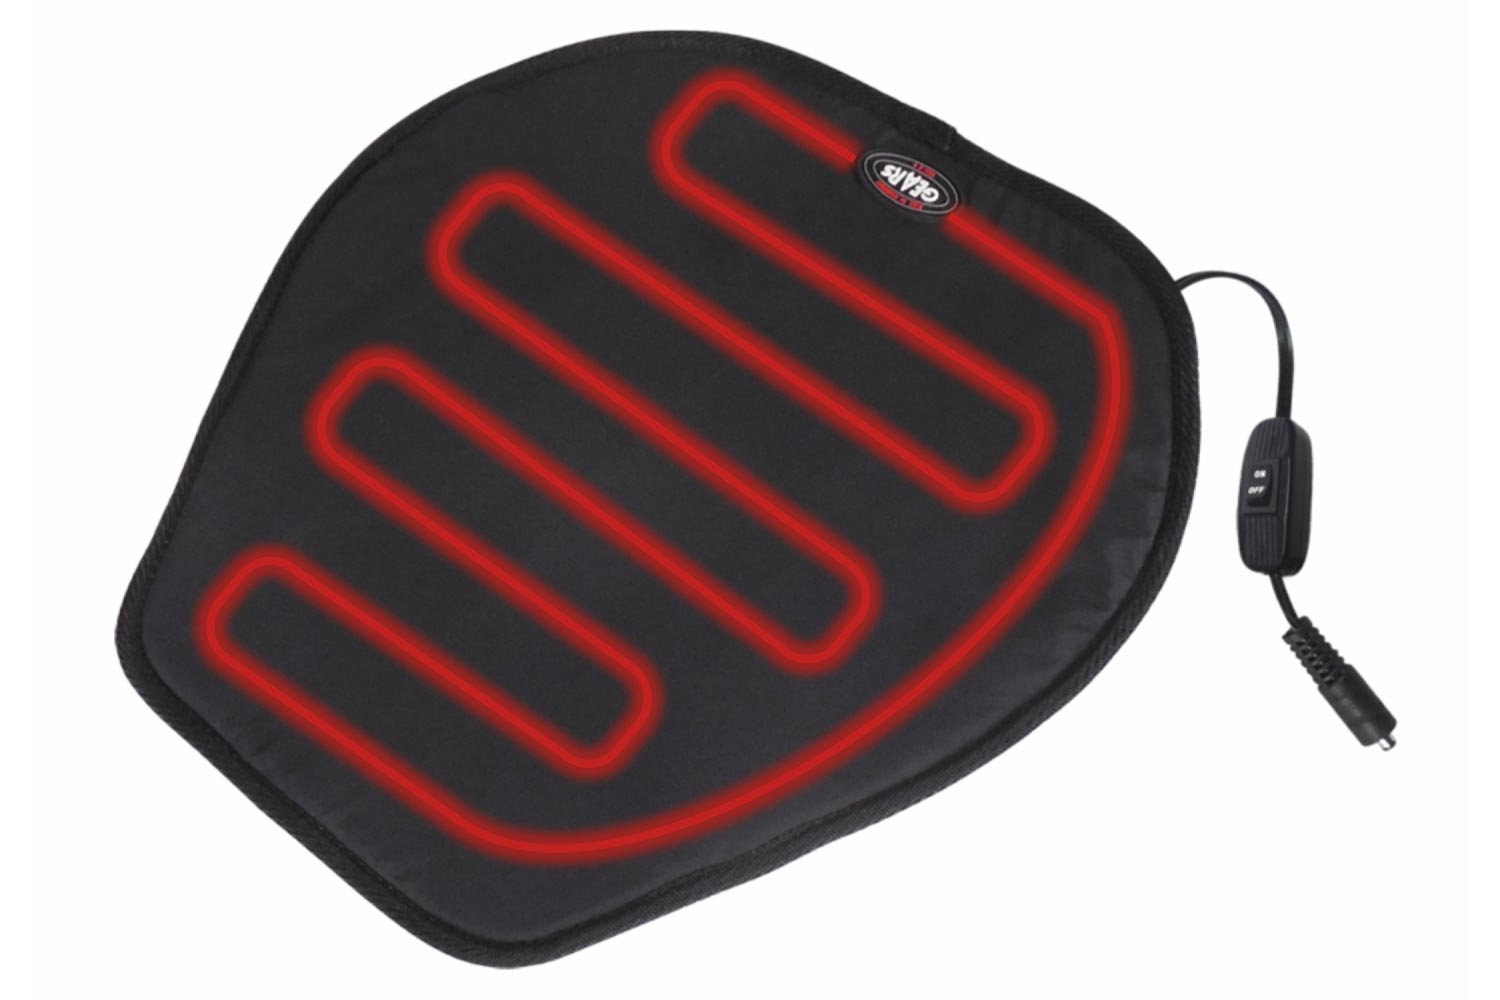 Heated Seat Pad for Motorcycle, Snowmobile, & ATV